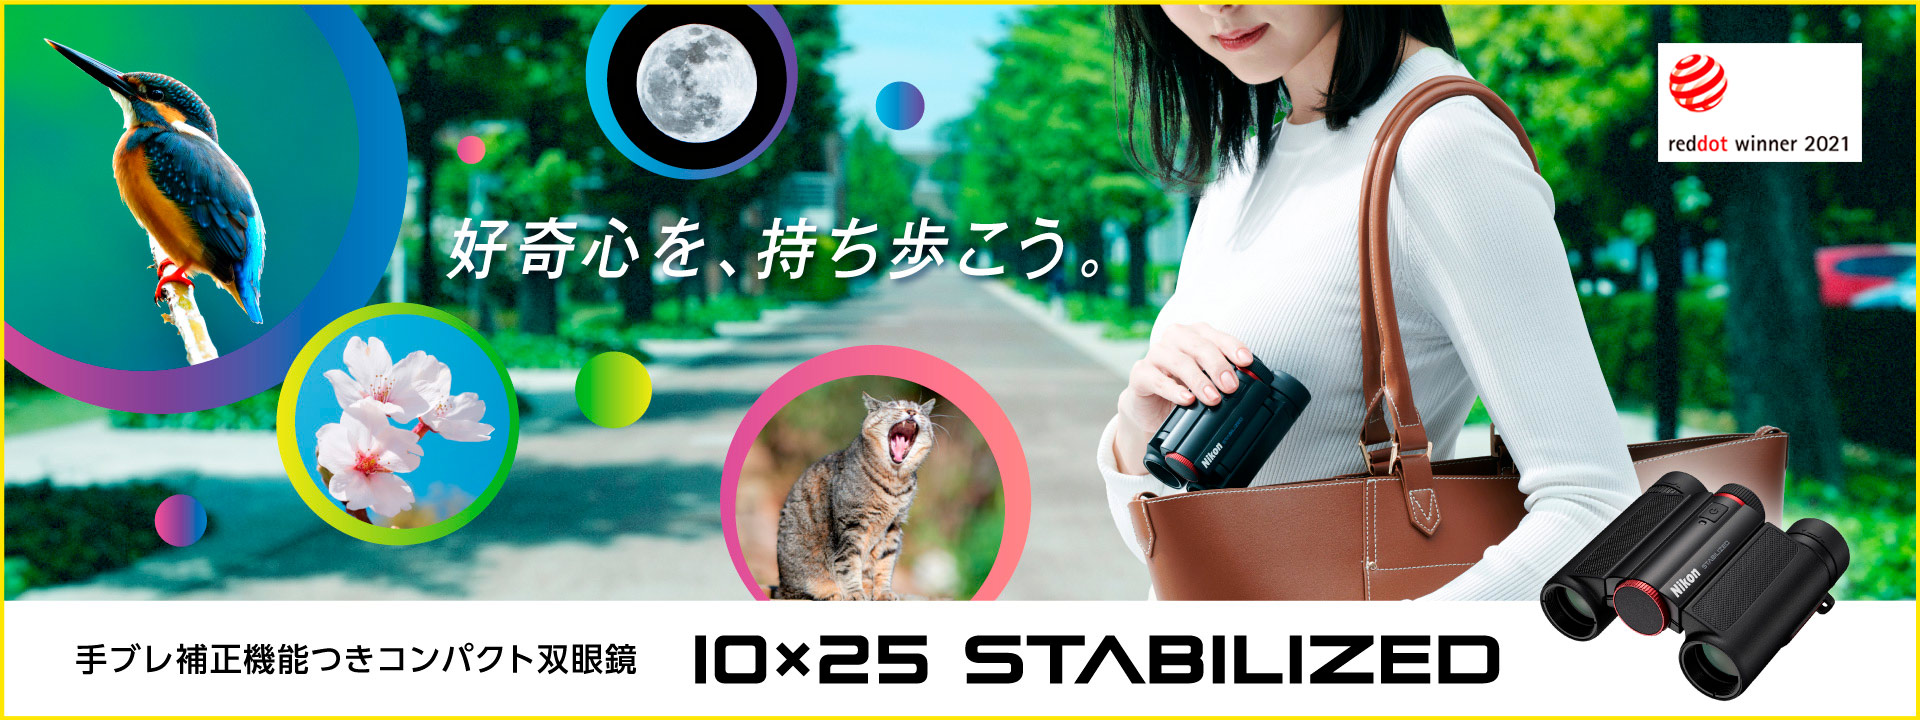 10x25 STABILIZED - 概要 | 双眼鏡・望遠鏡・レーザー距離計 | ニコン